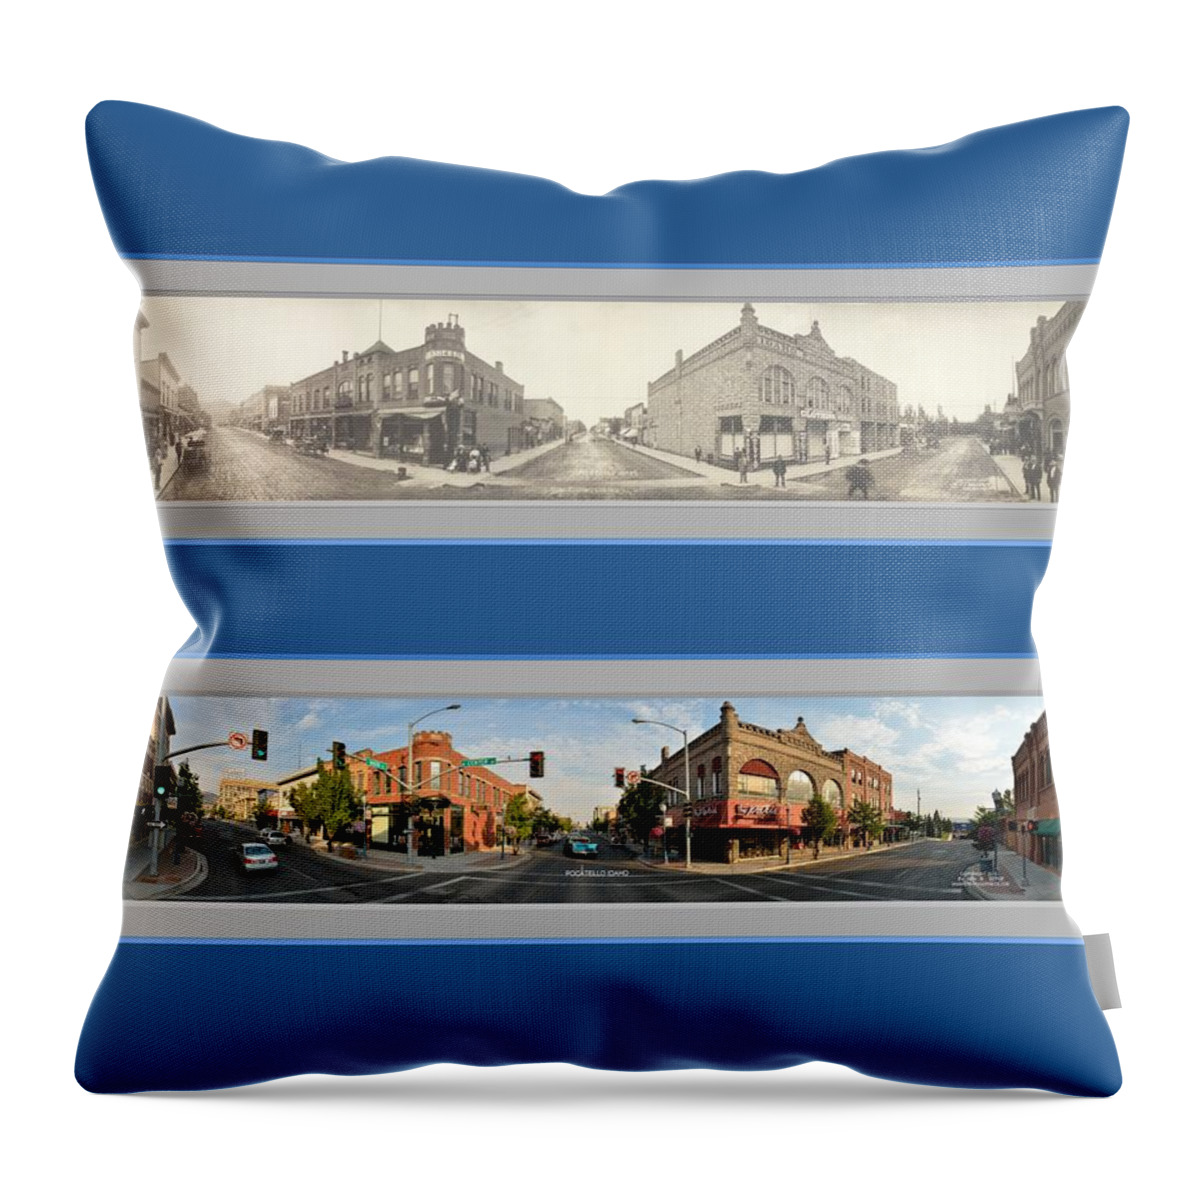 Historic Panorama Panoramic Reproduction Old New Now Then Pocatello Idaho Throw Pillow featuring the photograph Historic Pocatello Idaho Panoramic Reproduction by Ken DePue